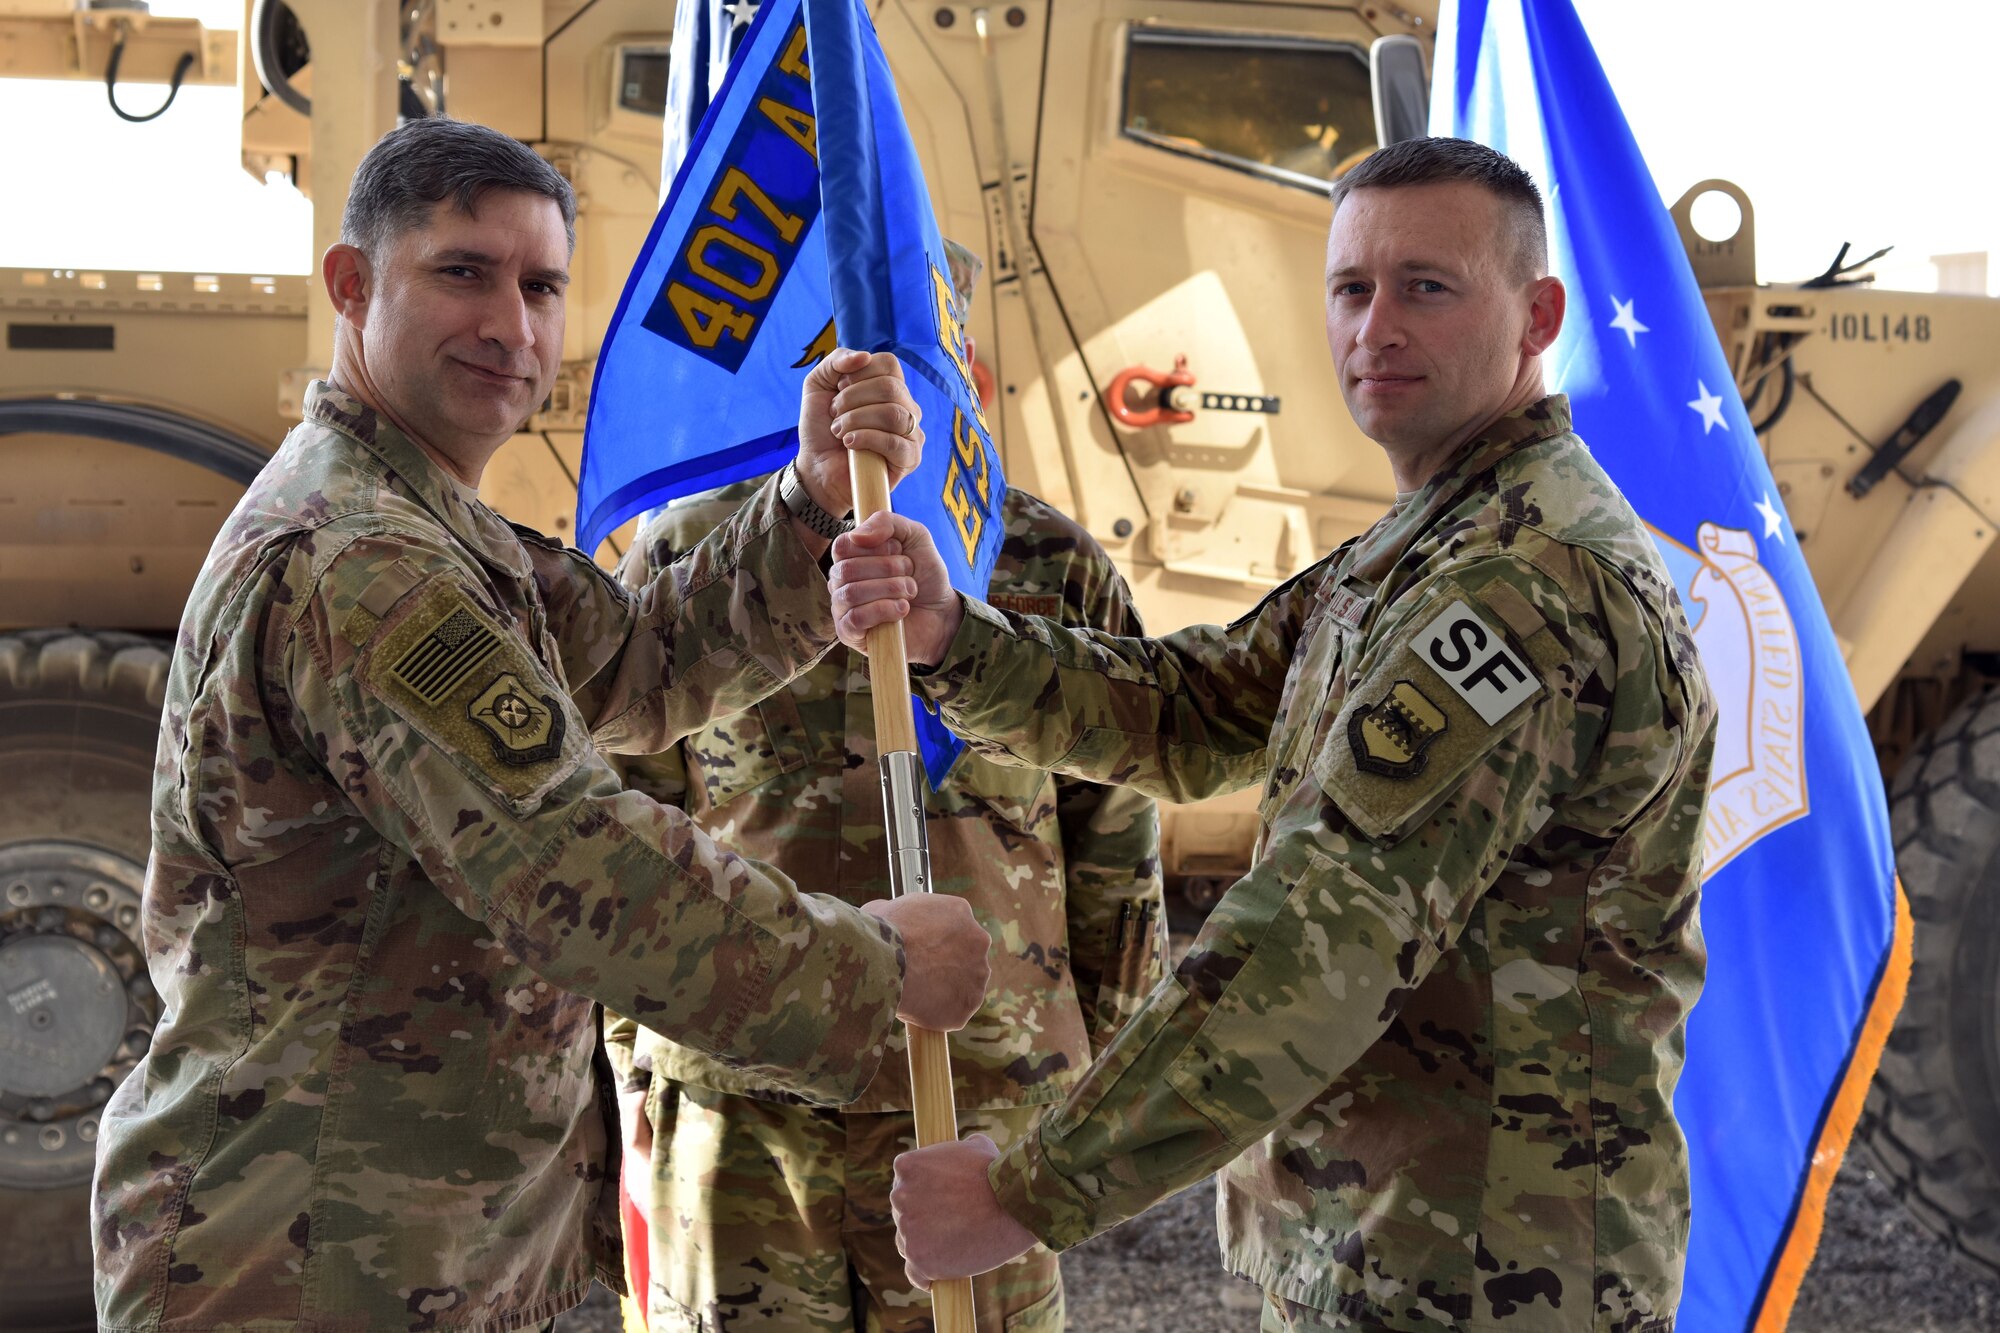 U.S. Air Force Col. John Gonzales, 407th Air Expeditionary Group Commander, passes a guidon to Maj. Aaron Gulczynski, 407th Expeditionary Security Forces Squadron Commander, in Southwest Asia, January 14, 2018. The change of command ceremony is a time honored military tradition that signifies the orderly transfer of authority. (U.S. Air Force photo by Staff Sgt. Joshua Edwards/Released)